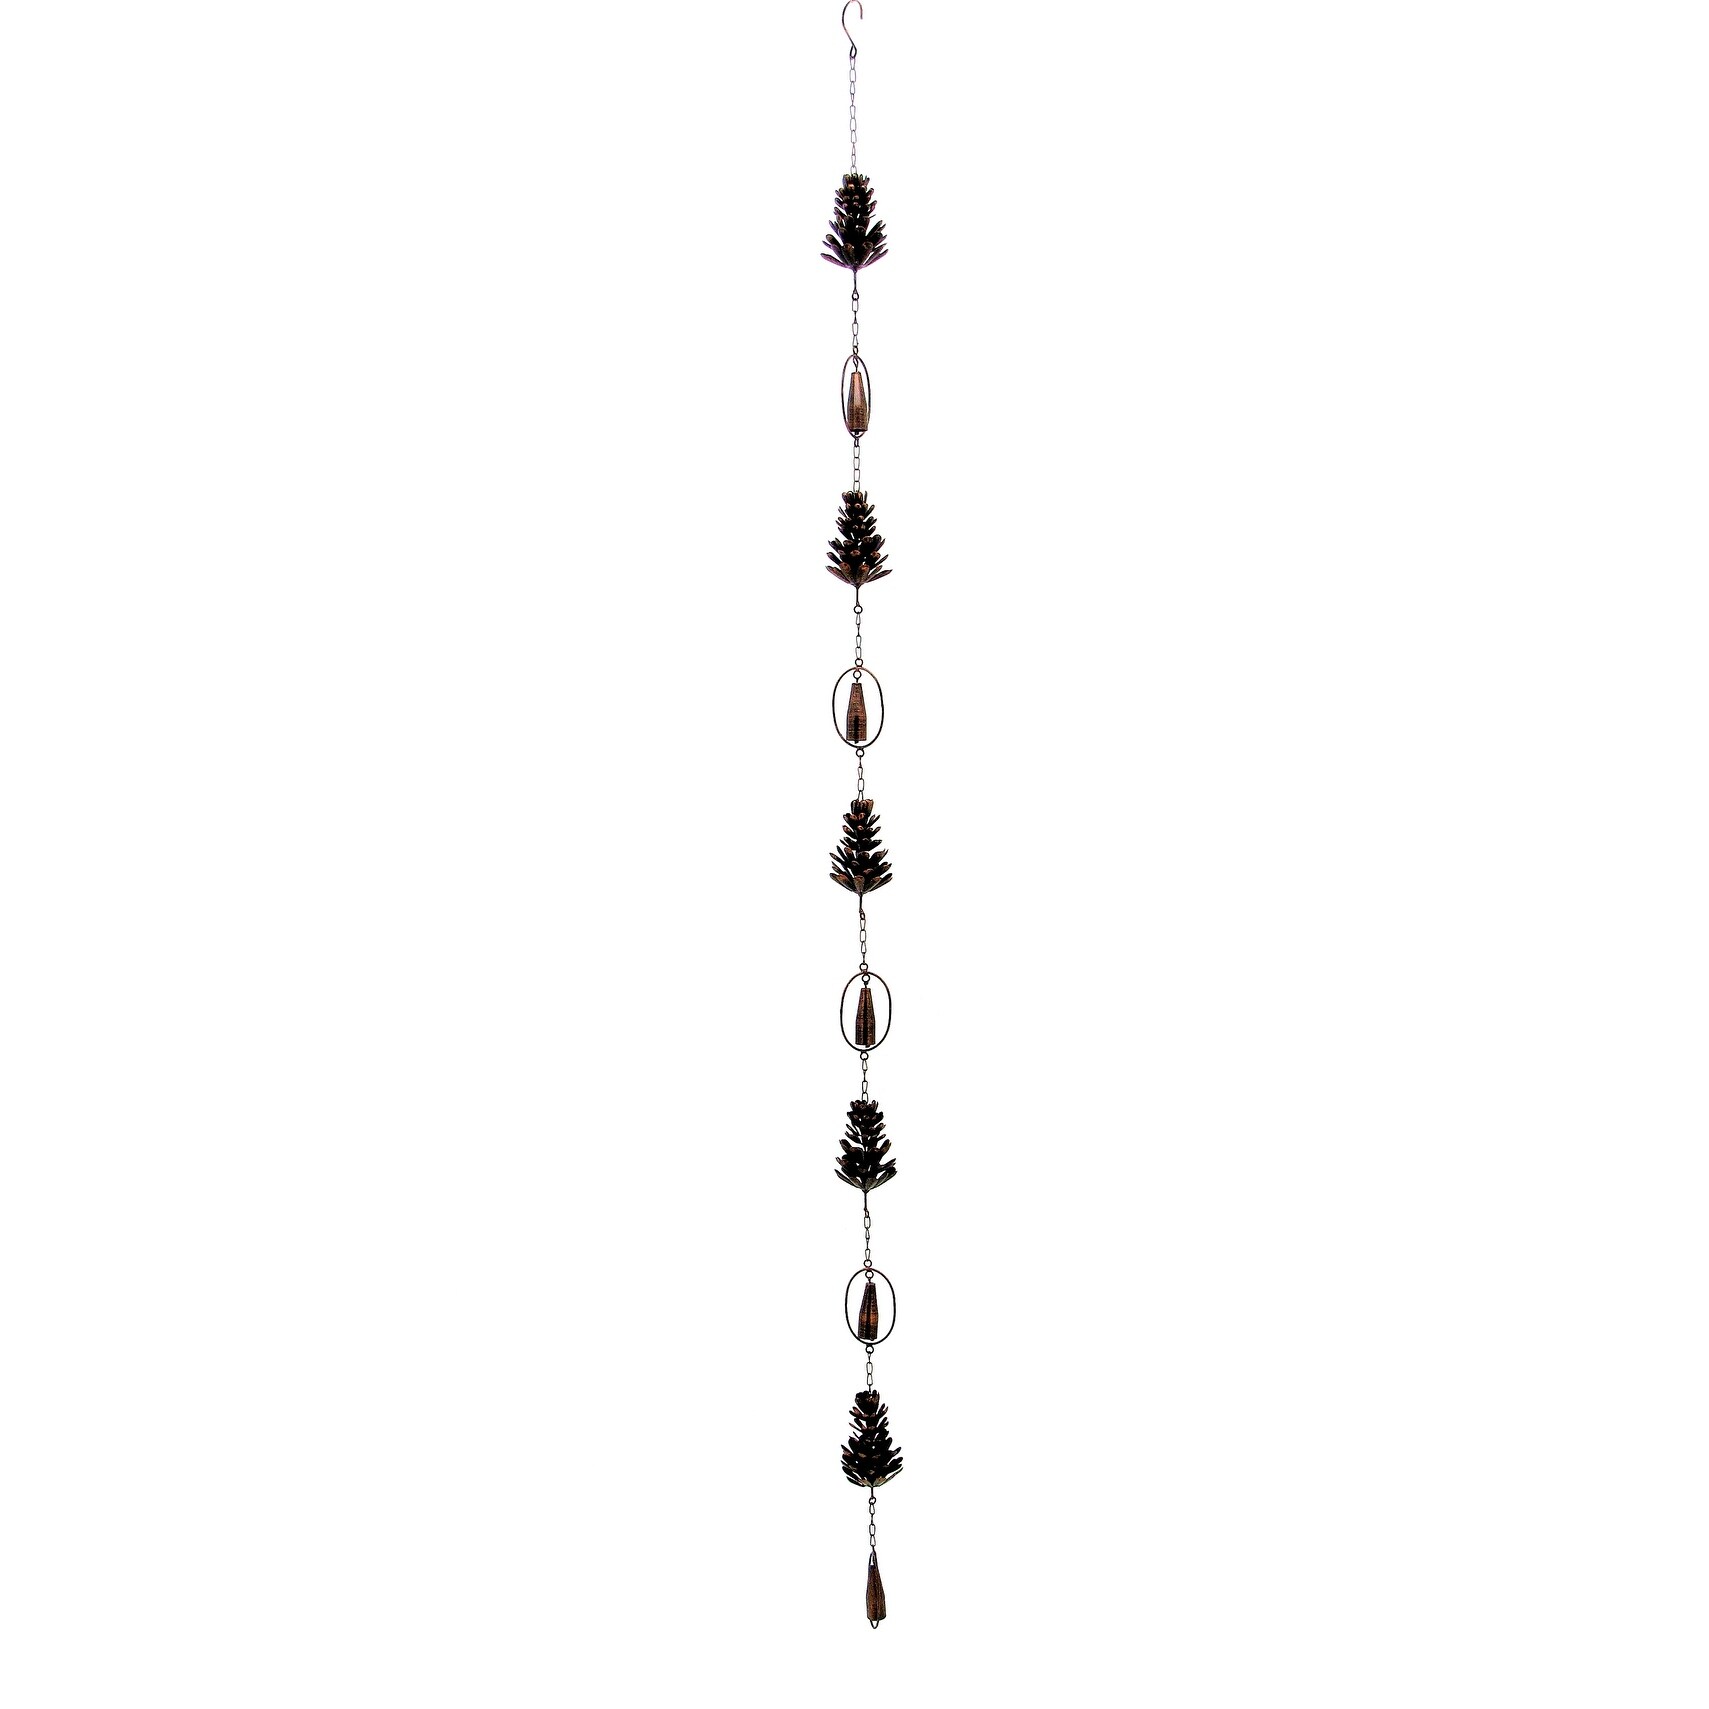 https://ak1.ostkcdn.com/images/products/is/images/direct/fcb71a4bc7960f60f43945bc32ef0efda2ecfa22/72%22-Long-Antique-Bronze-Hanging-Pinecone-Rain-Chain.jpg